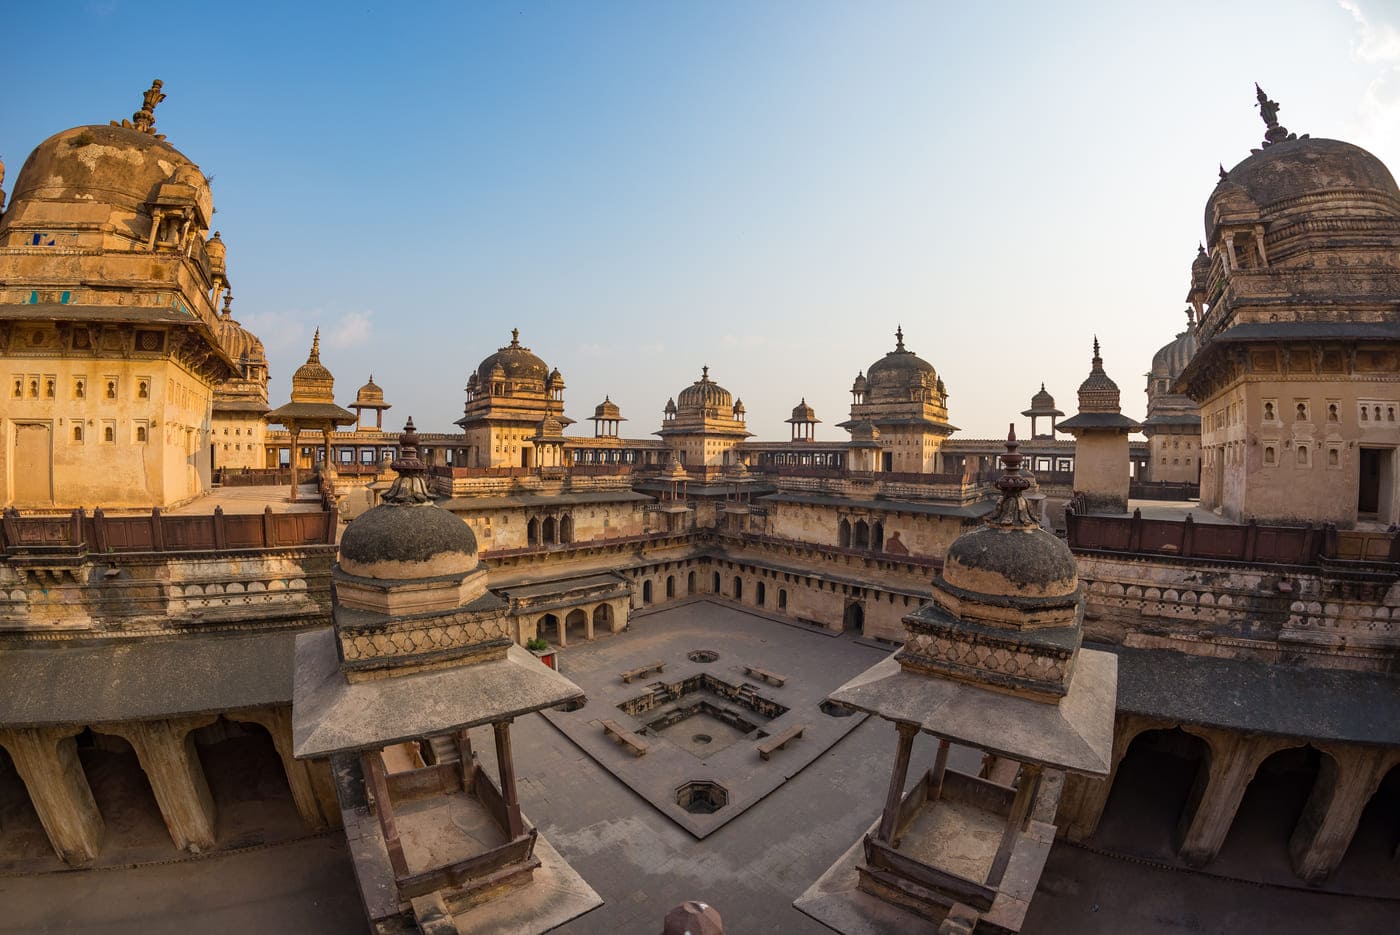 The magnificent Jahangir Mahal with its stone carvings, domes, turrets and central courtyard, Orchha 